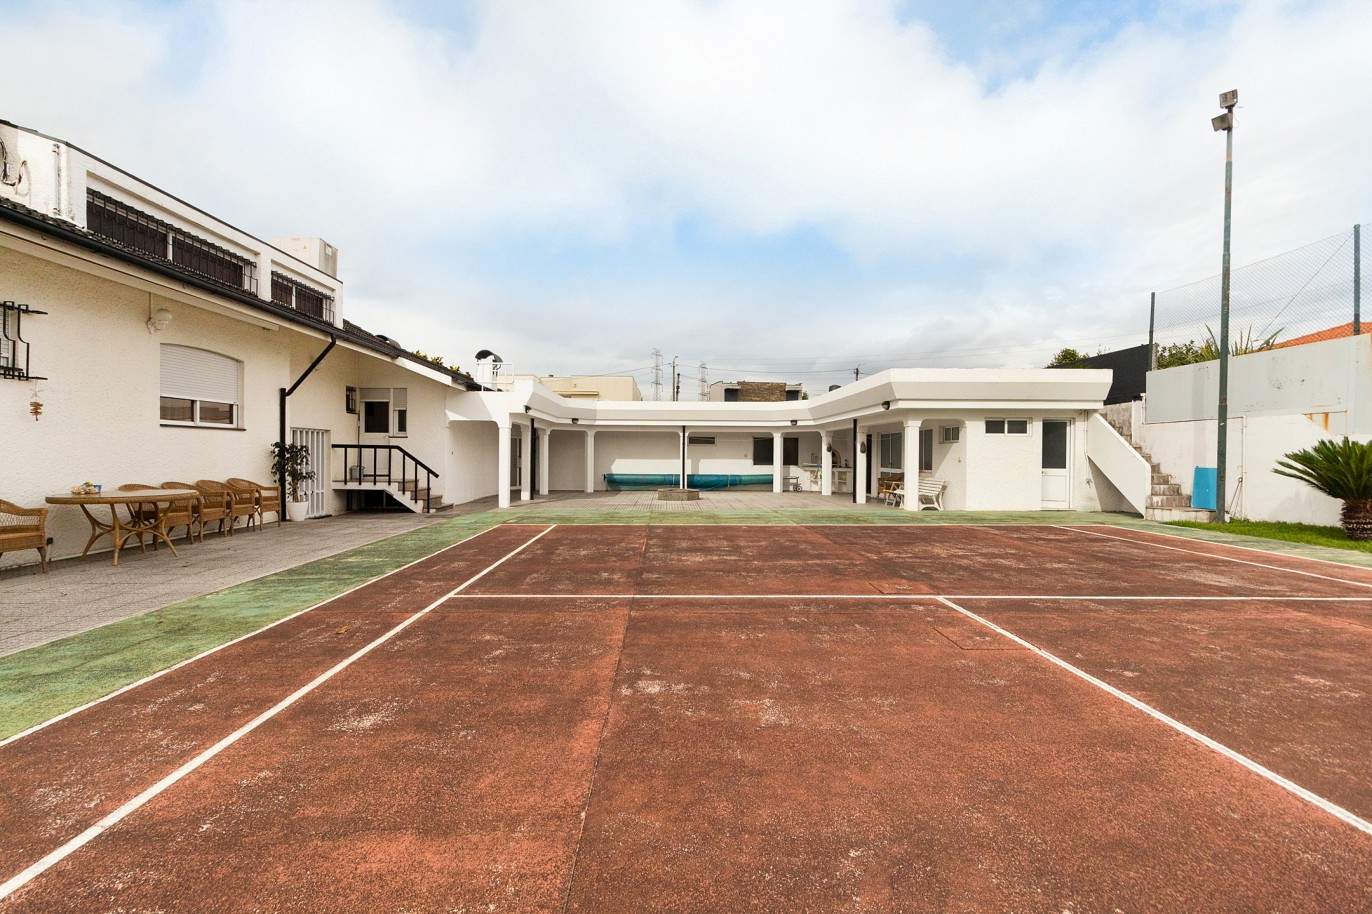 4 bedroom villa with pool, tennis court and garden, for sale, in Maia, Porto, Portugal_210633